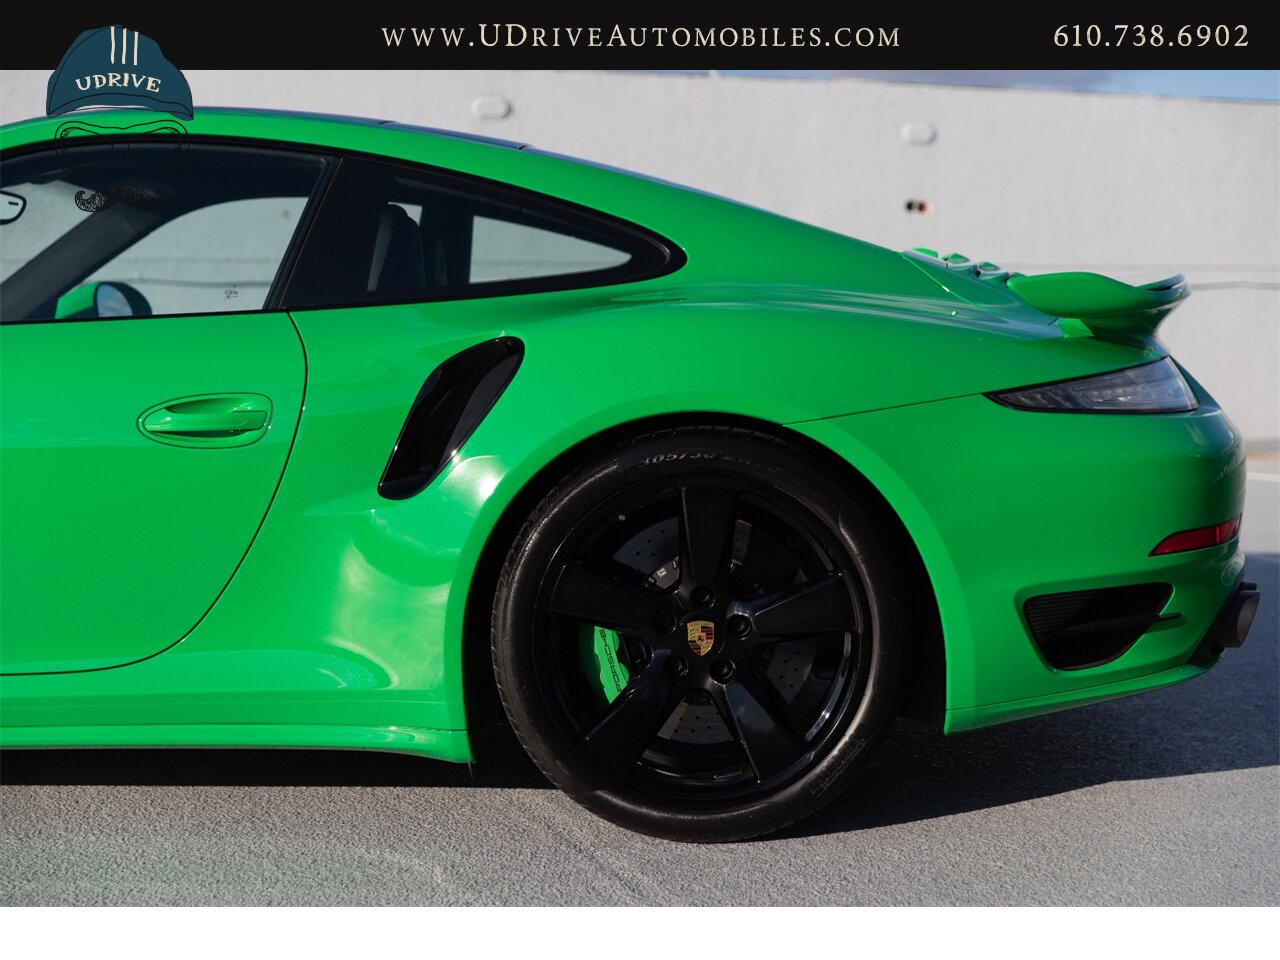 2016 Porsche 911 Turbo S PTS Viper Green Aerokit $203k MSRP  Painted Side Skirts Painted Grilles Wheels in Black - Photo 25 - West Chester, PA 19382